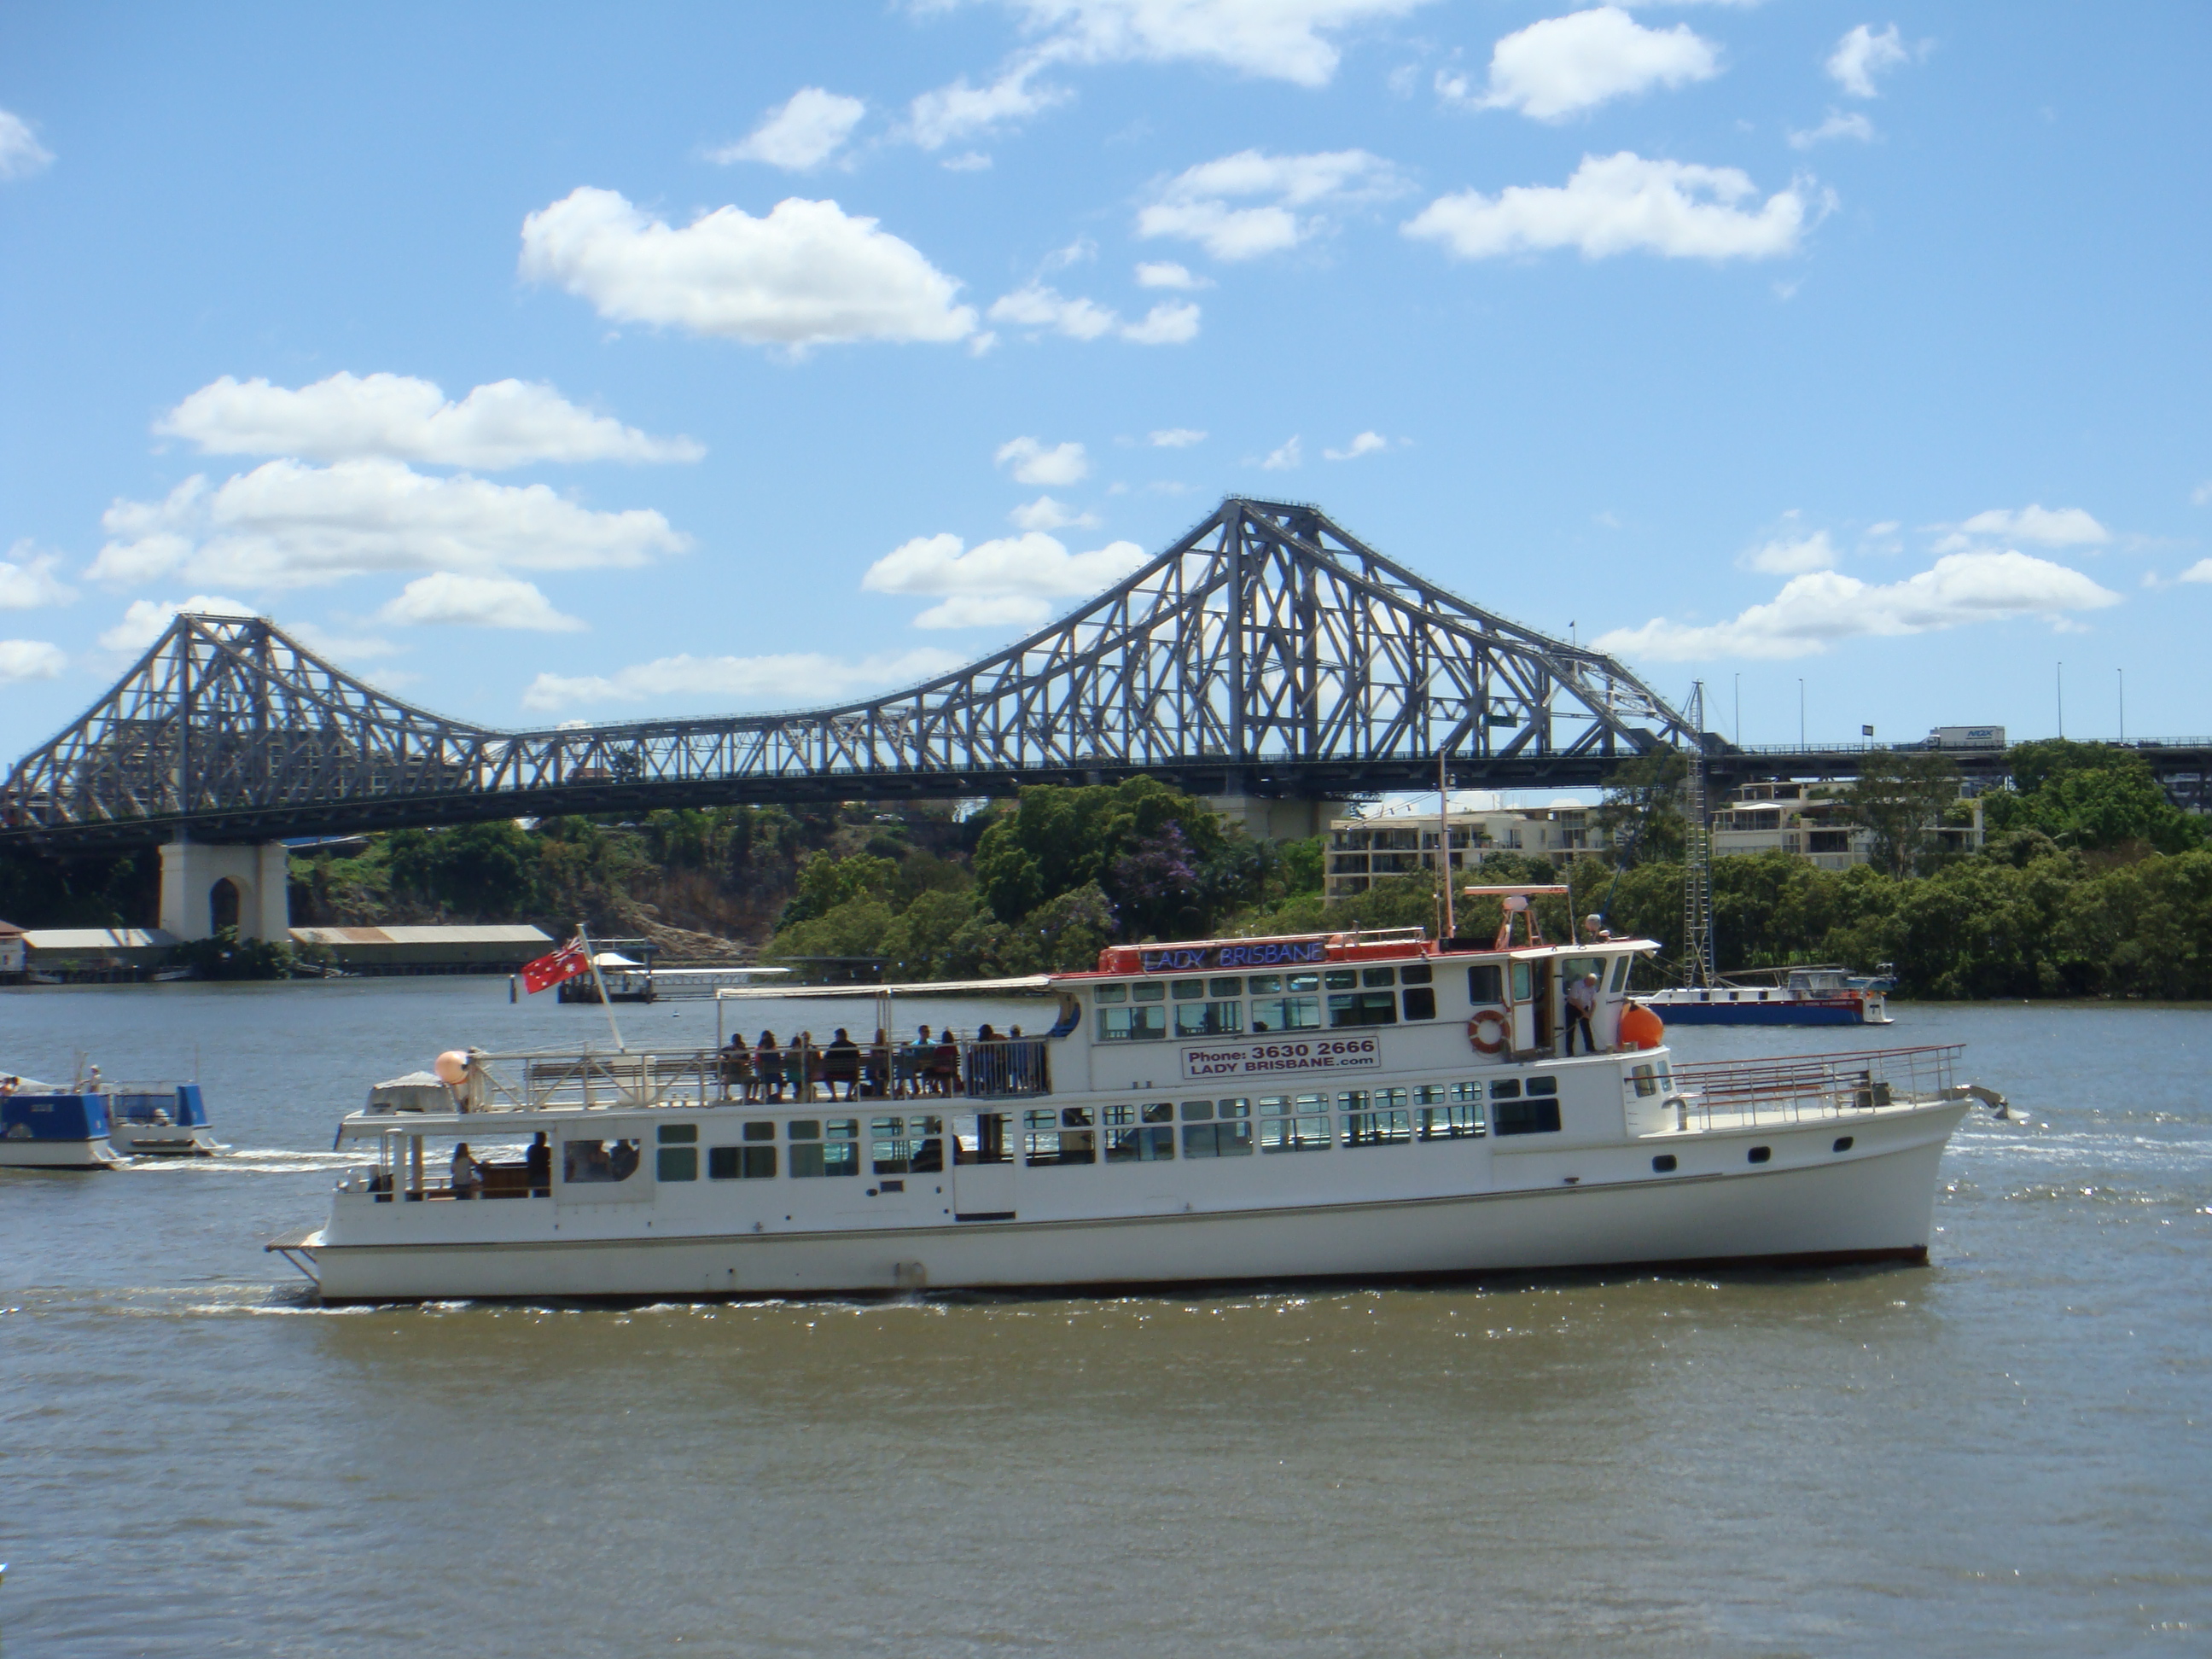 Christmas Party Cruise, Christmas Cruise, Corporate Cruise, Corporate